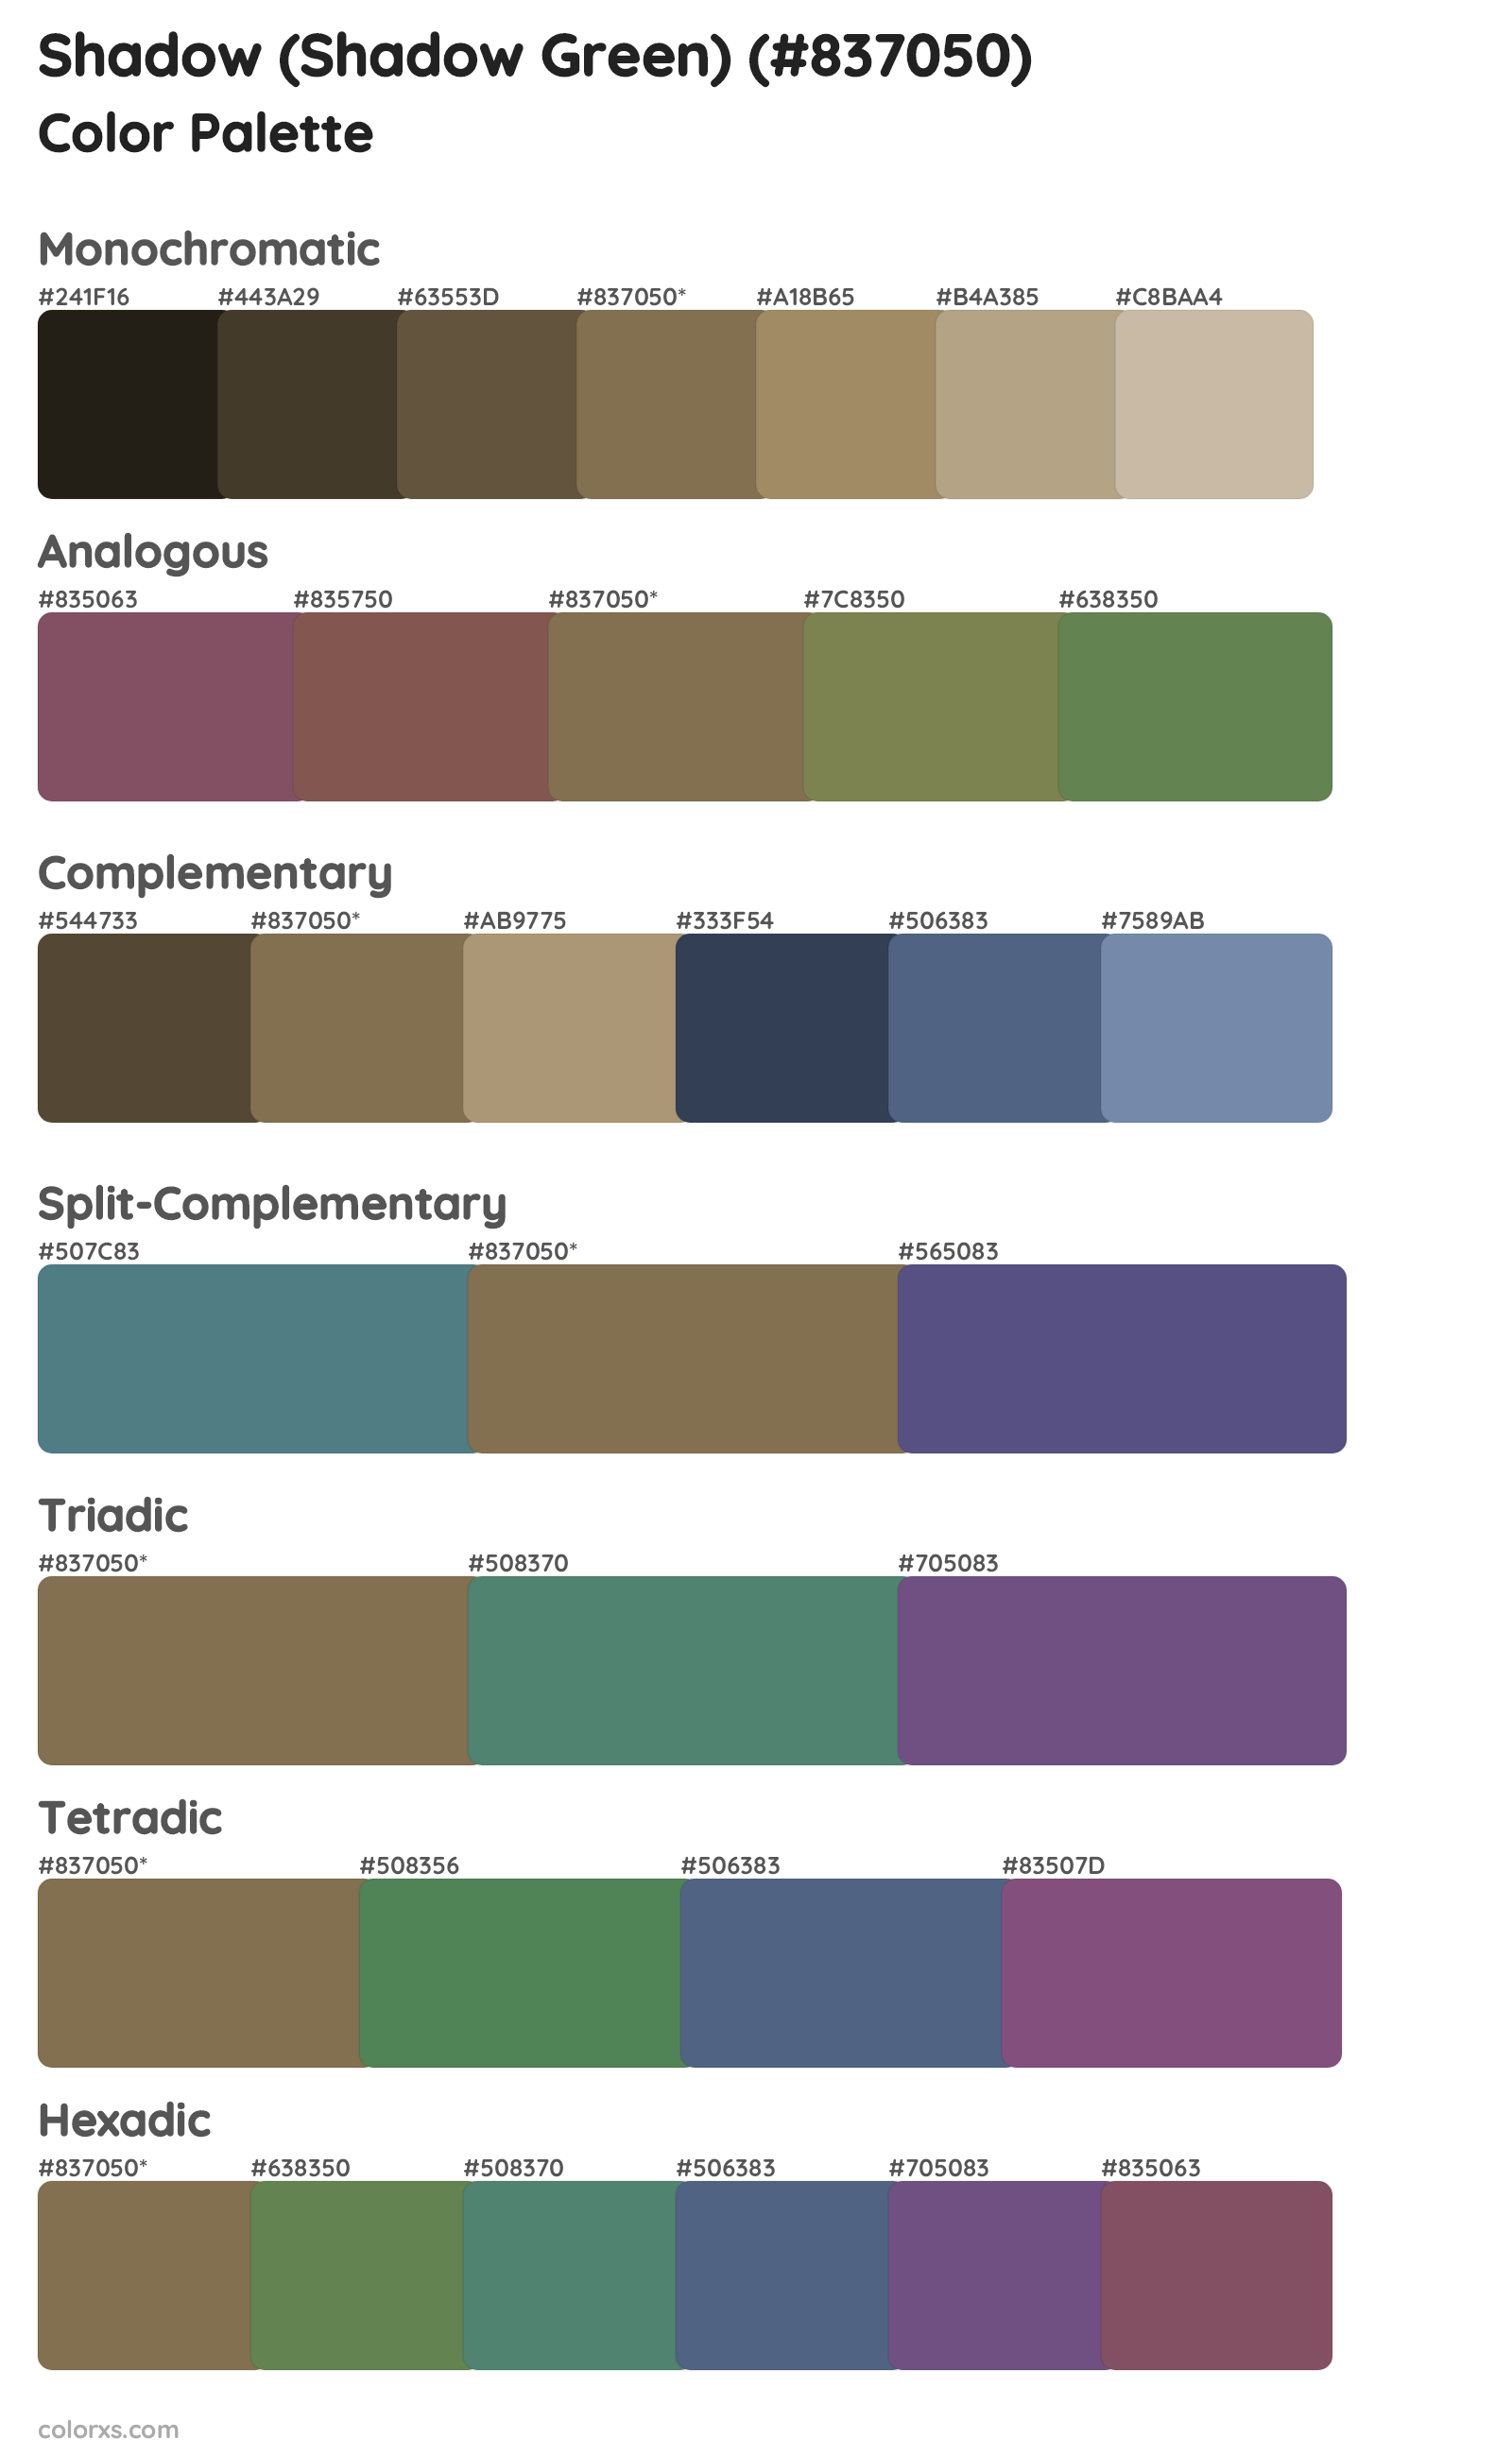 Shadow (Shadow Green) Color Scheme Palettes